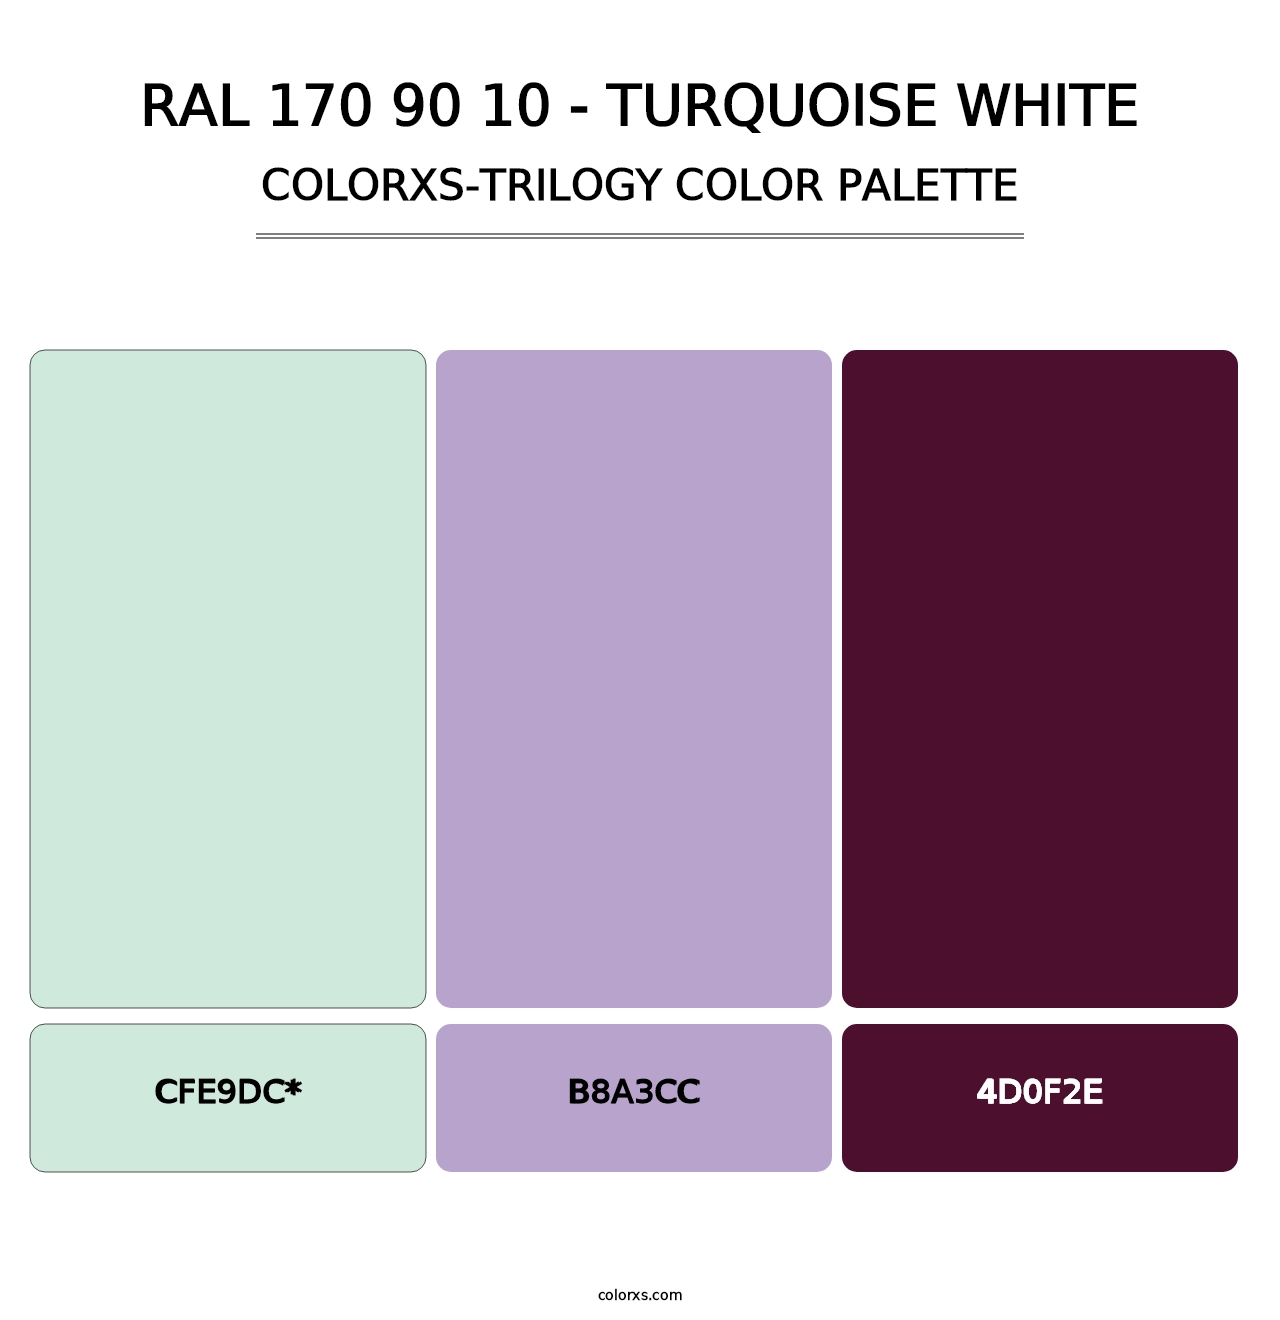 RAL 170 90 10 - Turquoise White - Colorxs Trilogy Palette